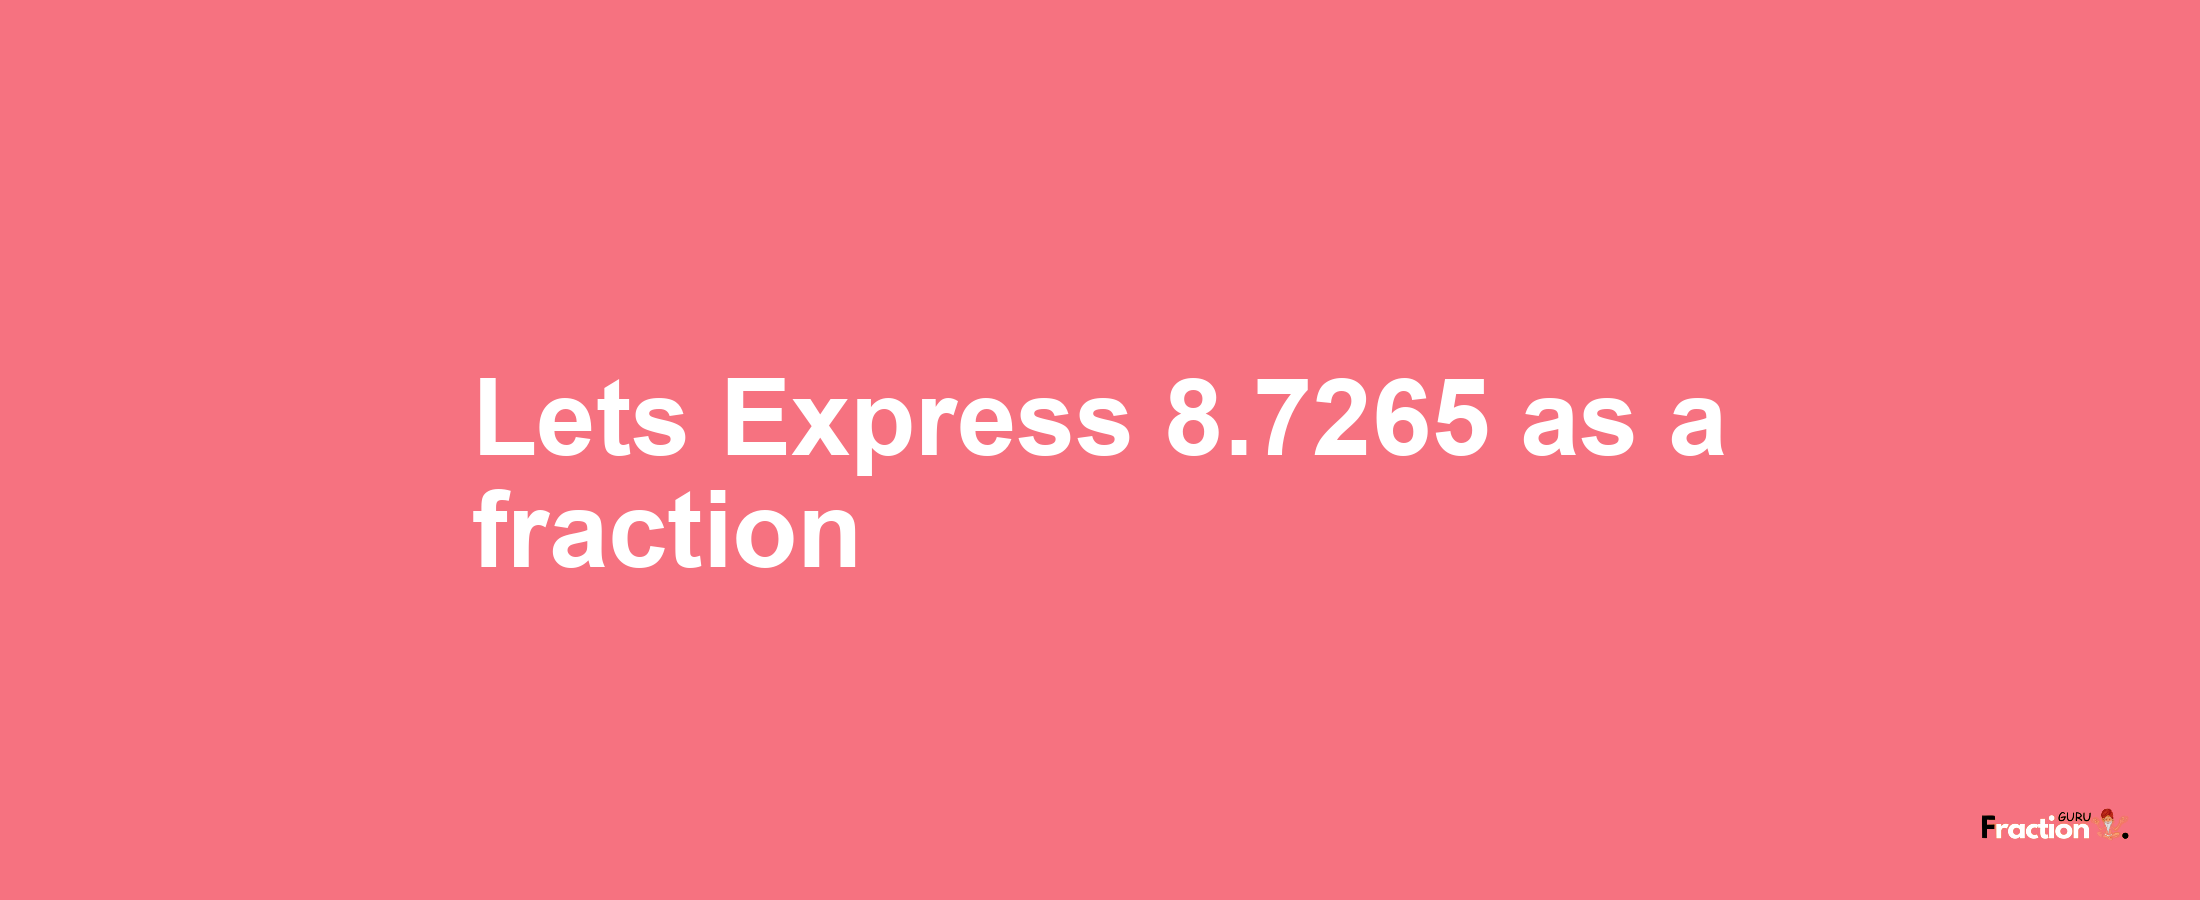 Lets Express 8.7265 as afraction